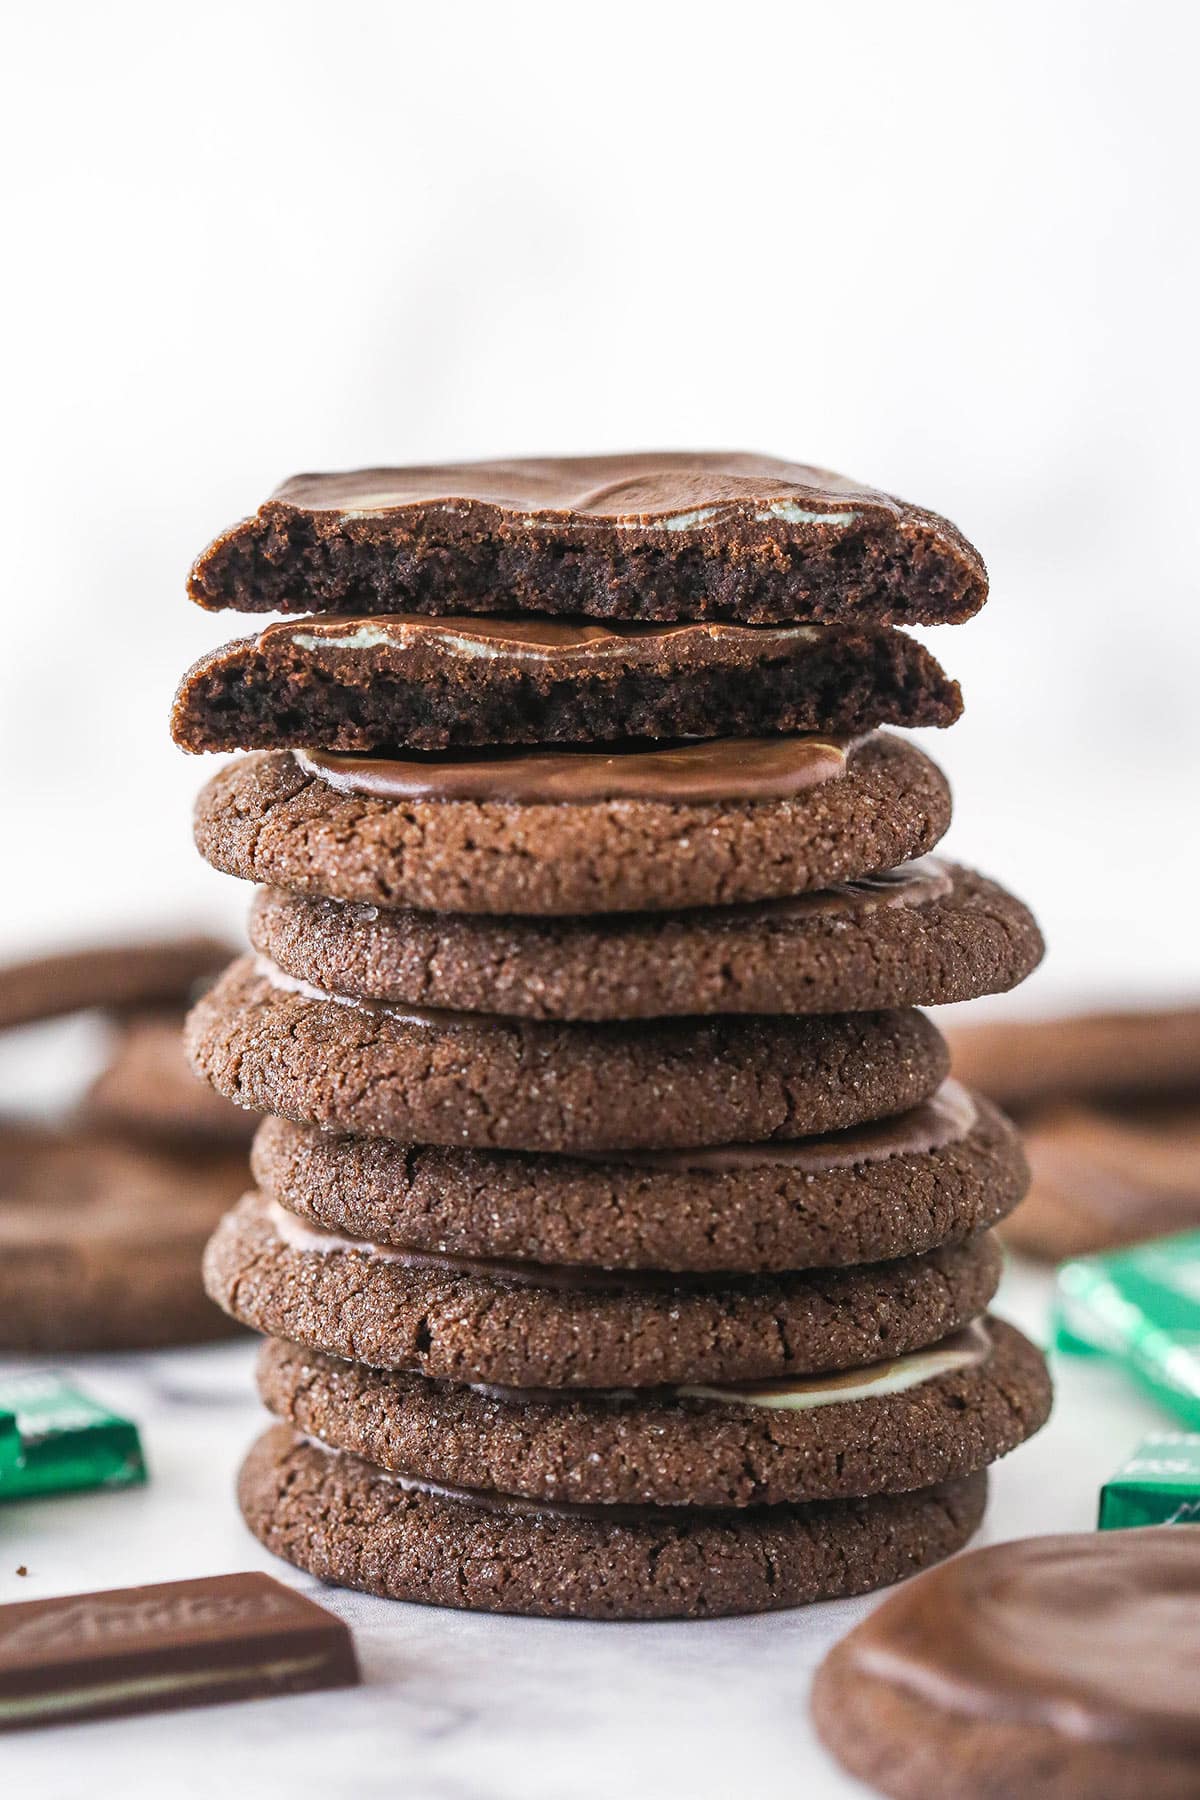 A stack of Andes mint chocolate cookies. The cookie on top is broken in half.